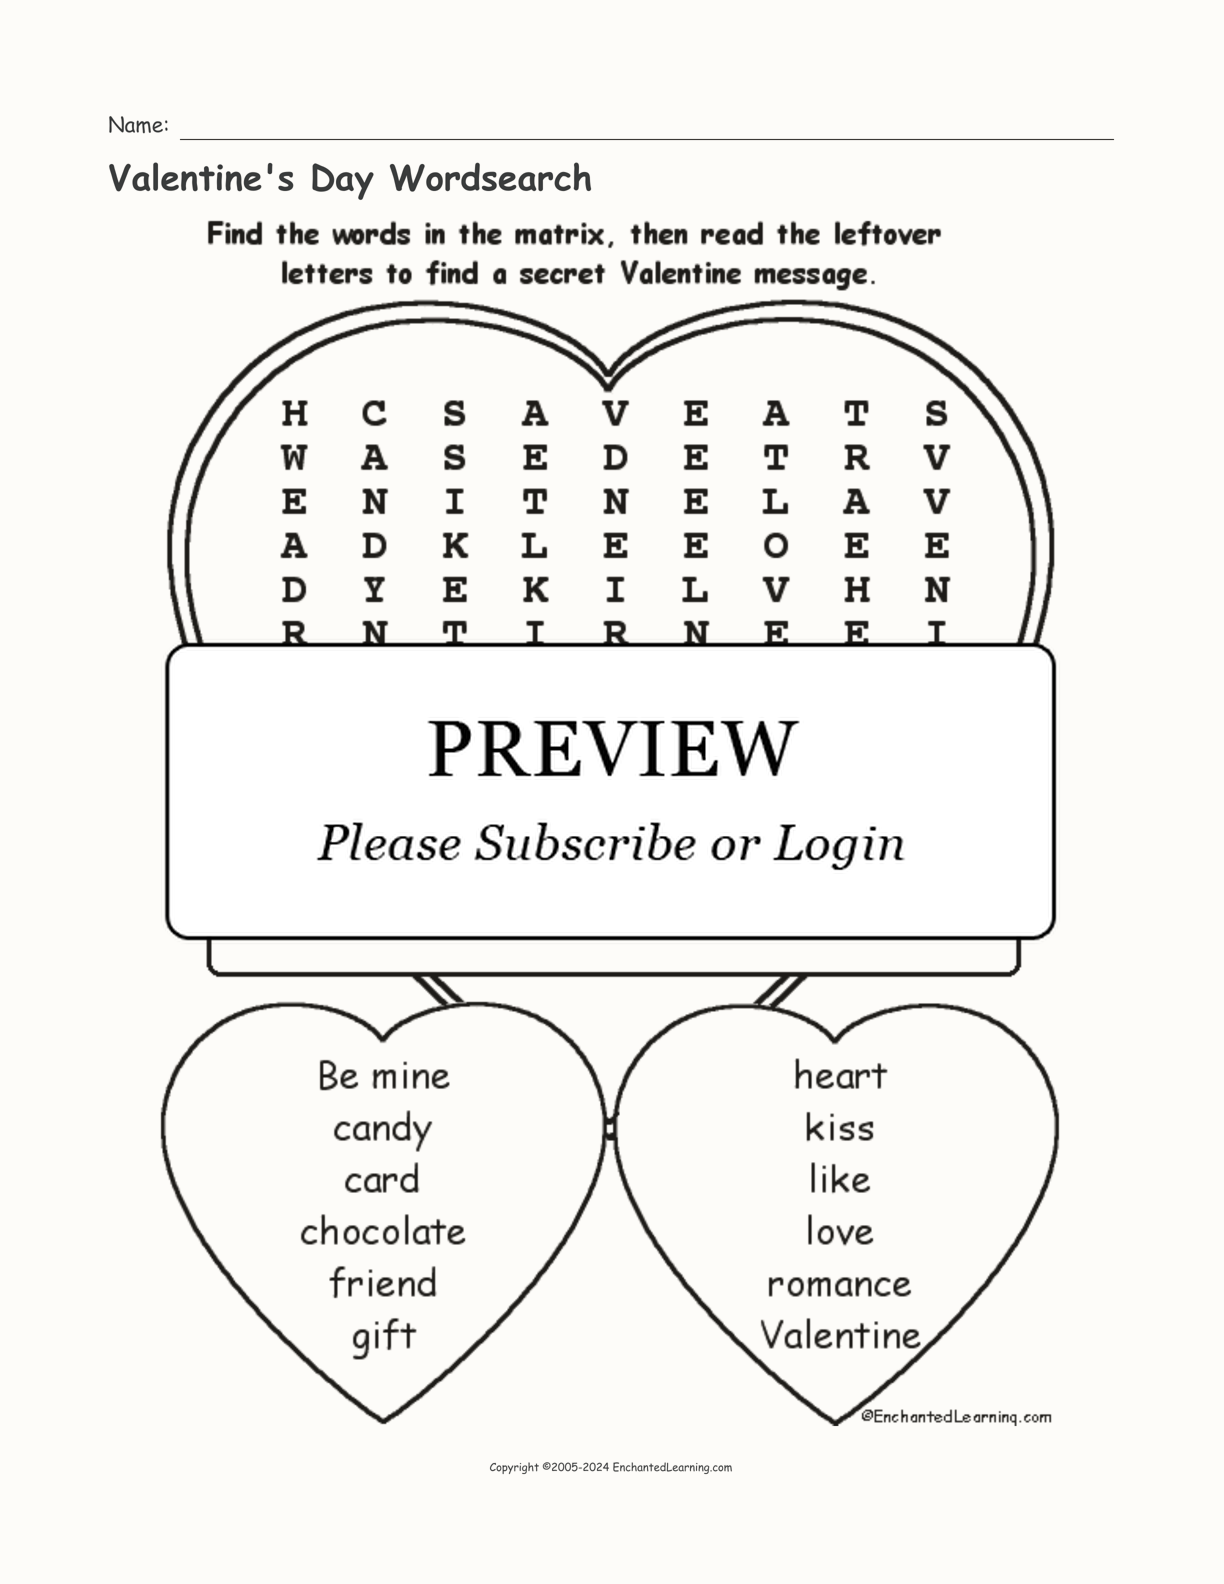 Valentine's Day Wordsearch interactive worksheet page 1